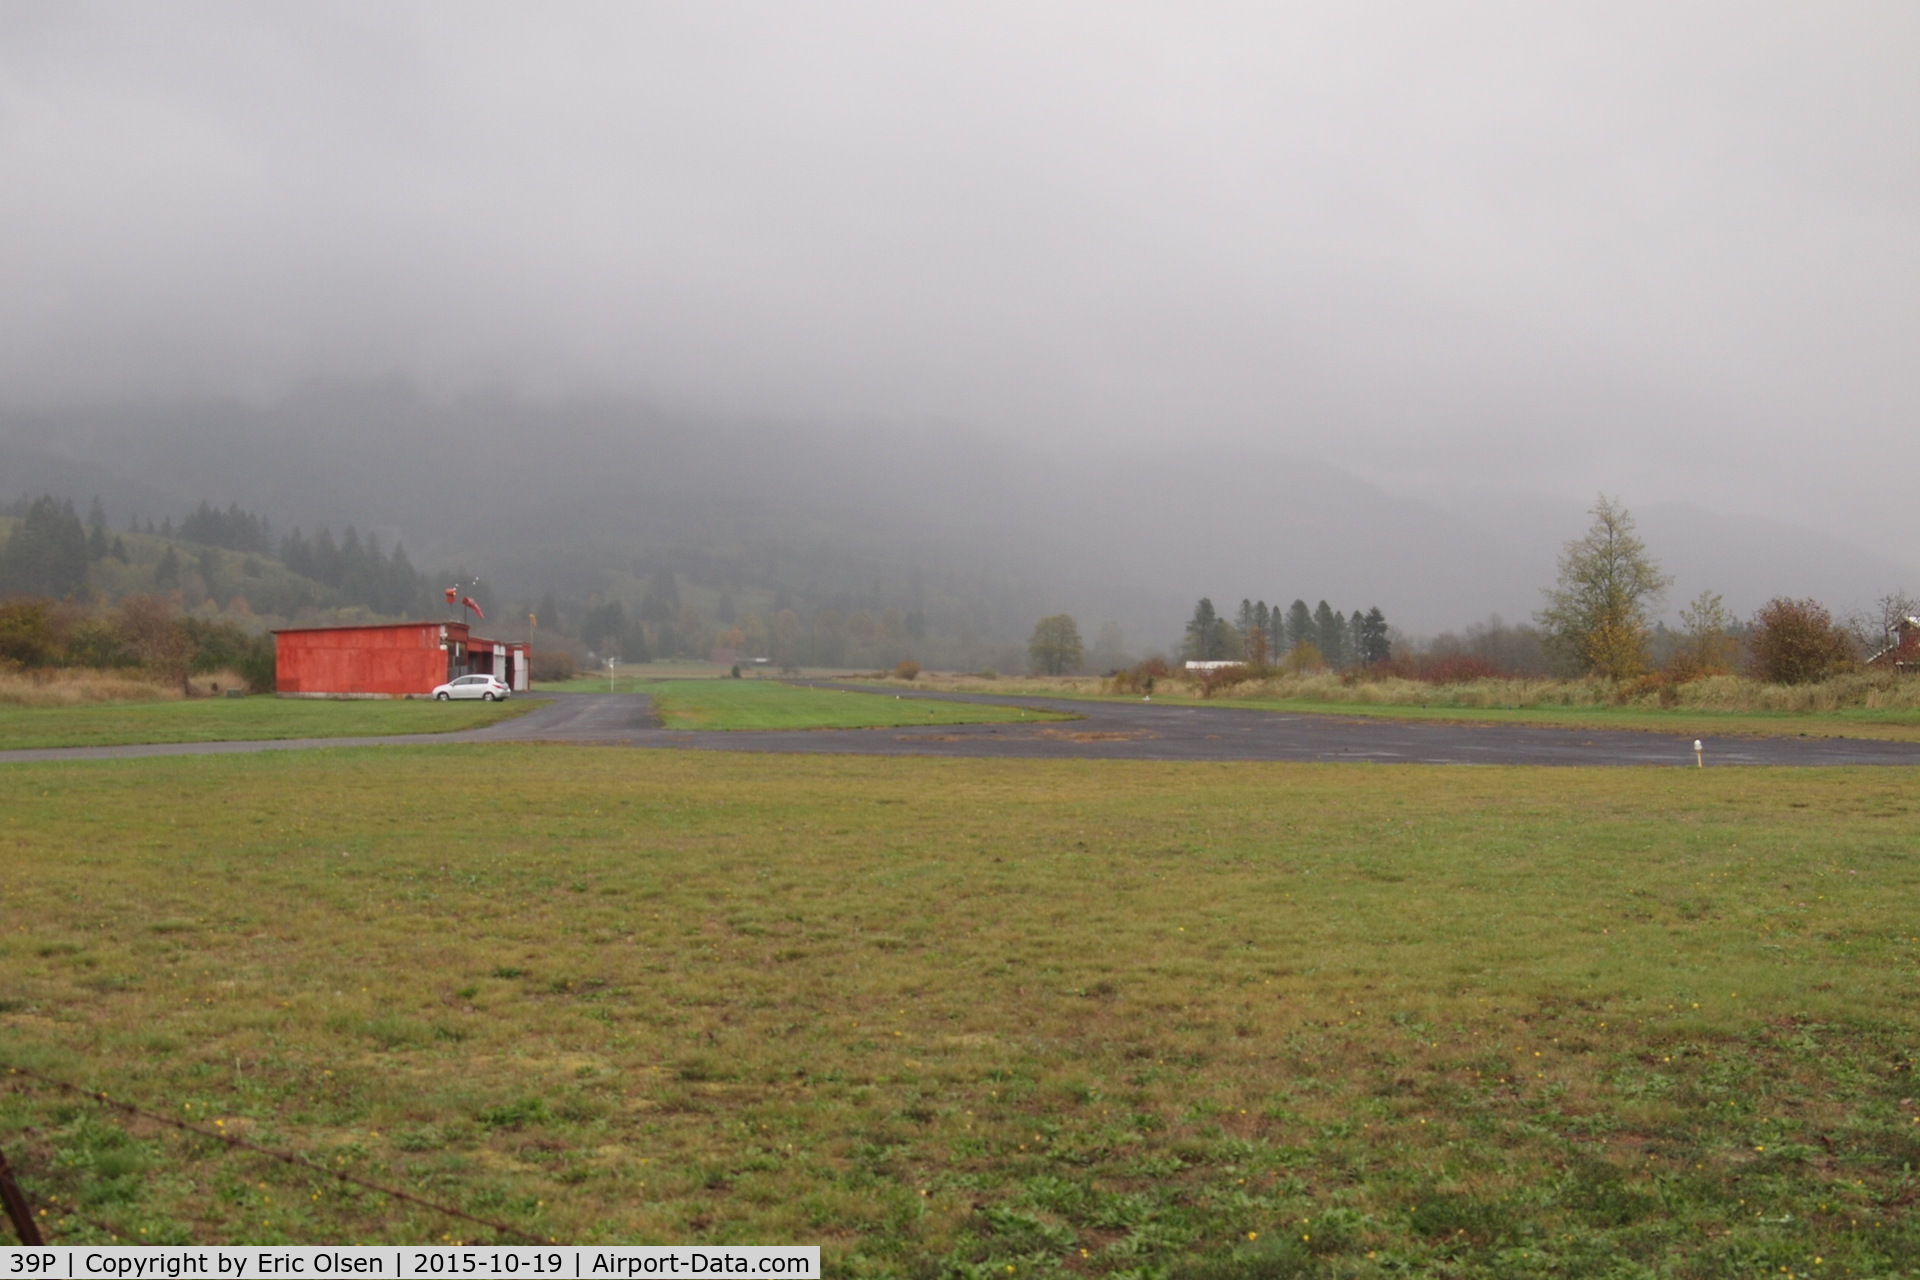 Strom Field Airport (39P) - Strom Field in Morton, WA. Hwy 12 is on the south side of the airport. Elevation is 950'